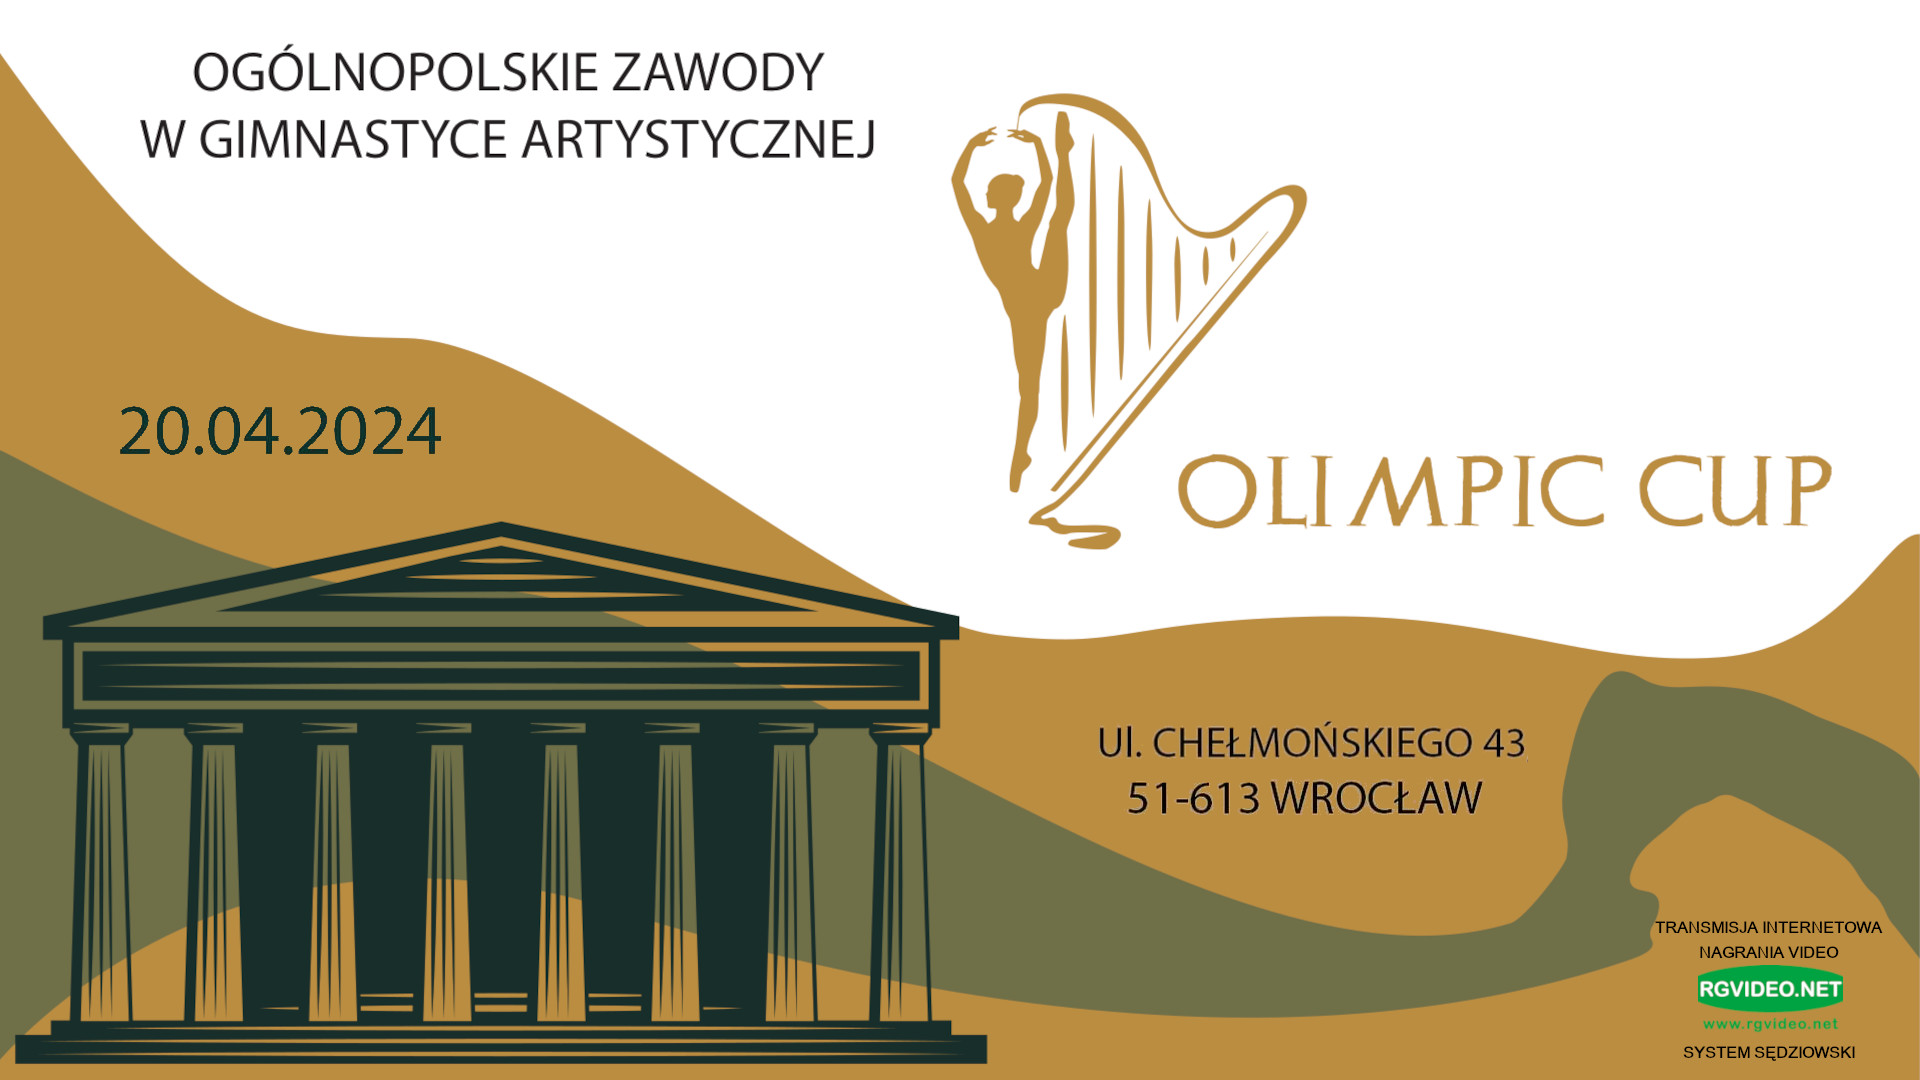 VIDEO - OLIMPIC CUP 2024